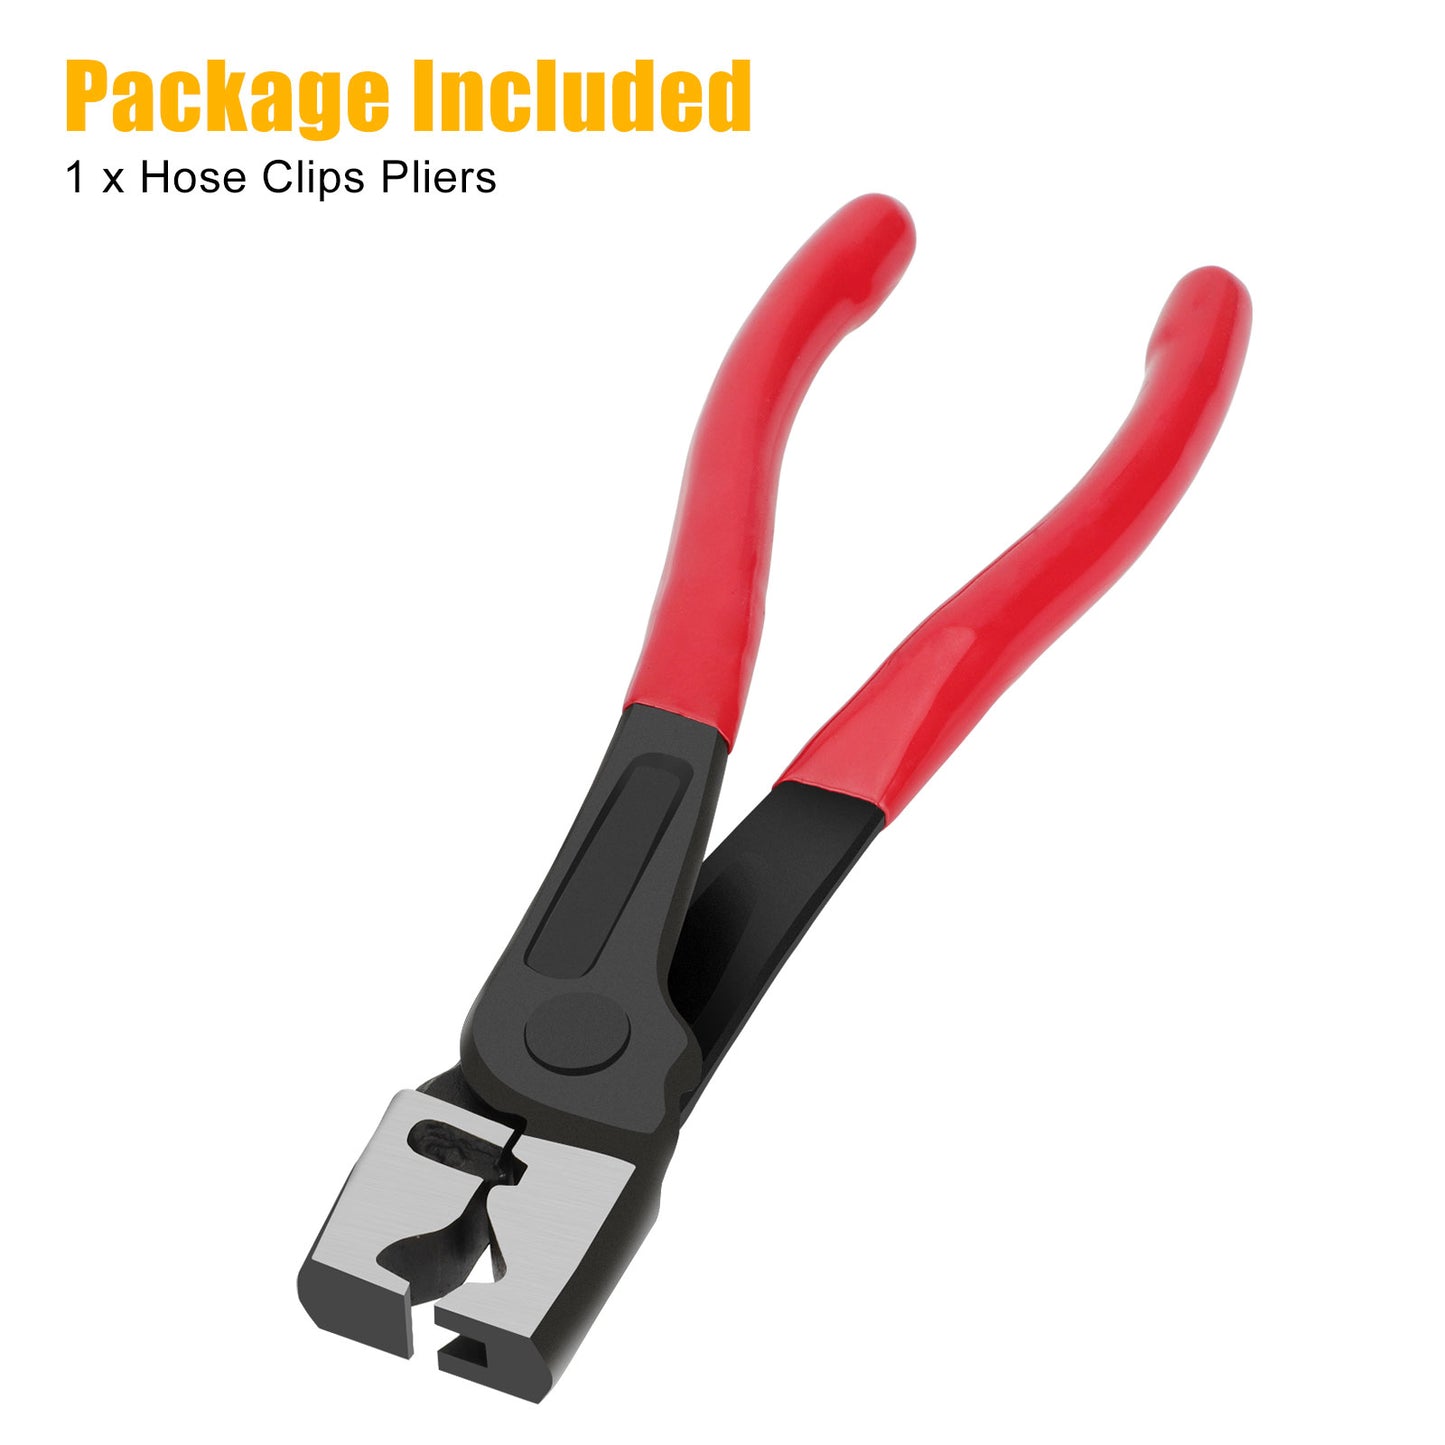 1.4in Pliers head Hose Clip Plier - Universal Collar Hose Clip Clamp Pliers Water Pipe Boot Clamp Calliper Car Tools